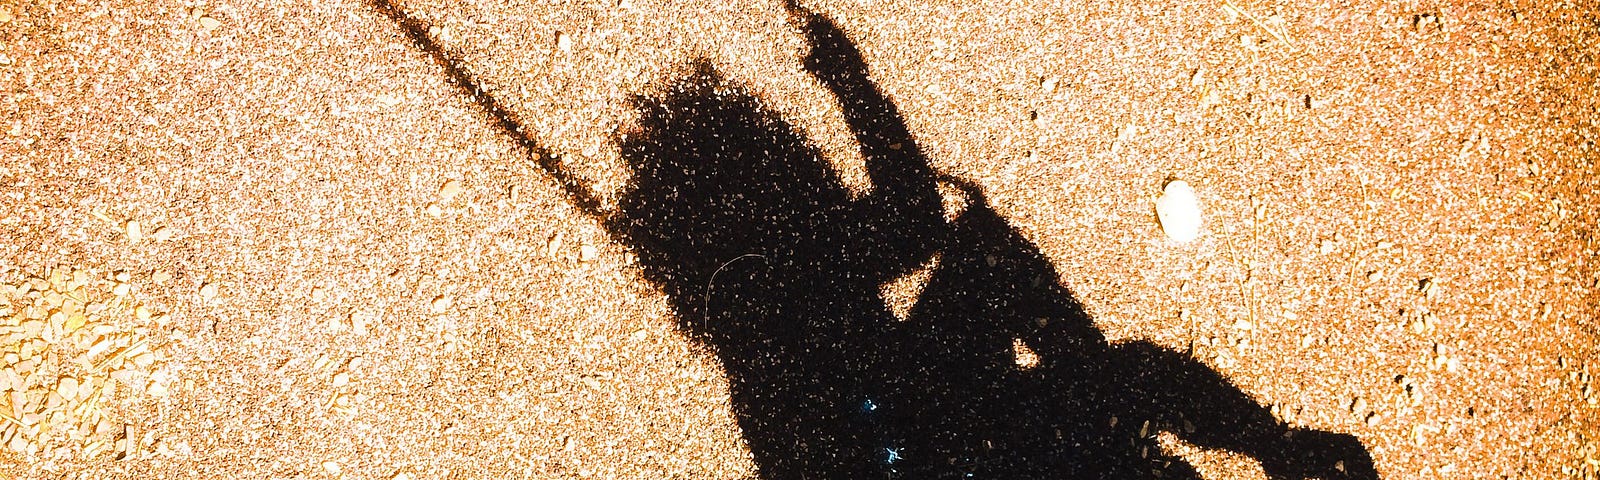 A photo of a shadow of a child on a swing.